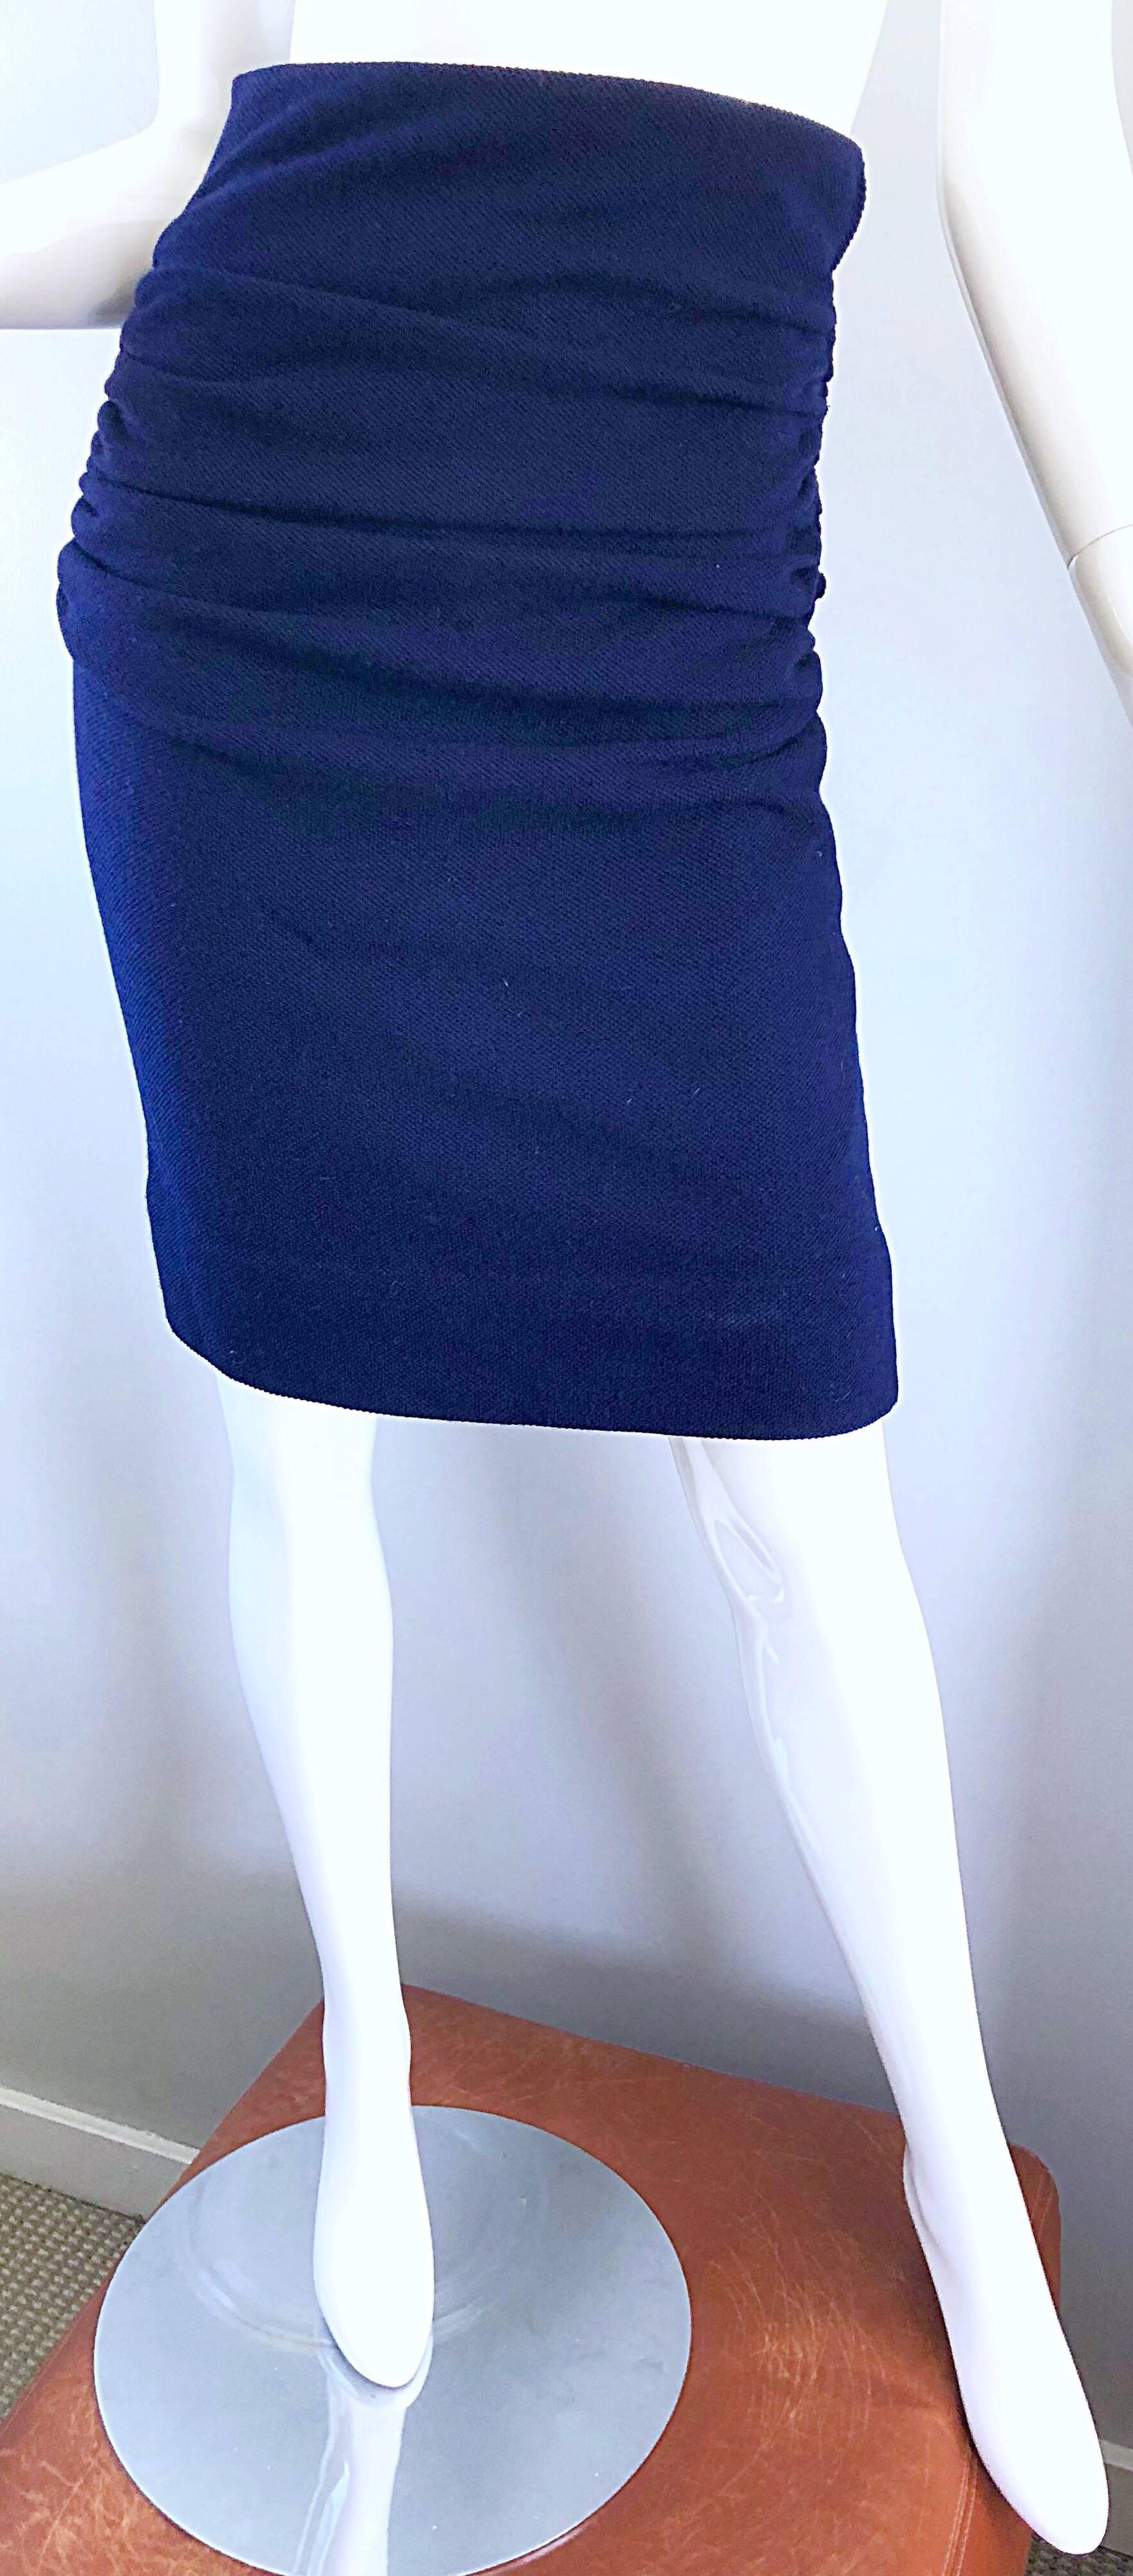 1990s Karl Lagerfeld High Waisted Navy Blue Wool Ruched 90s VIntage Pencil Skirt For Sale 6